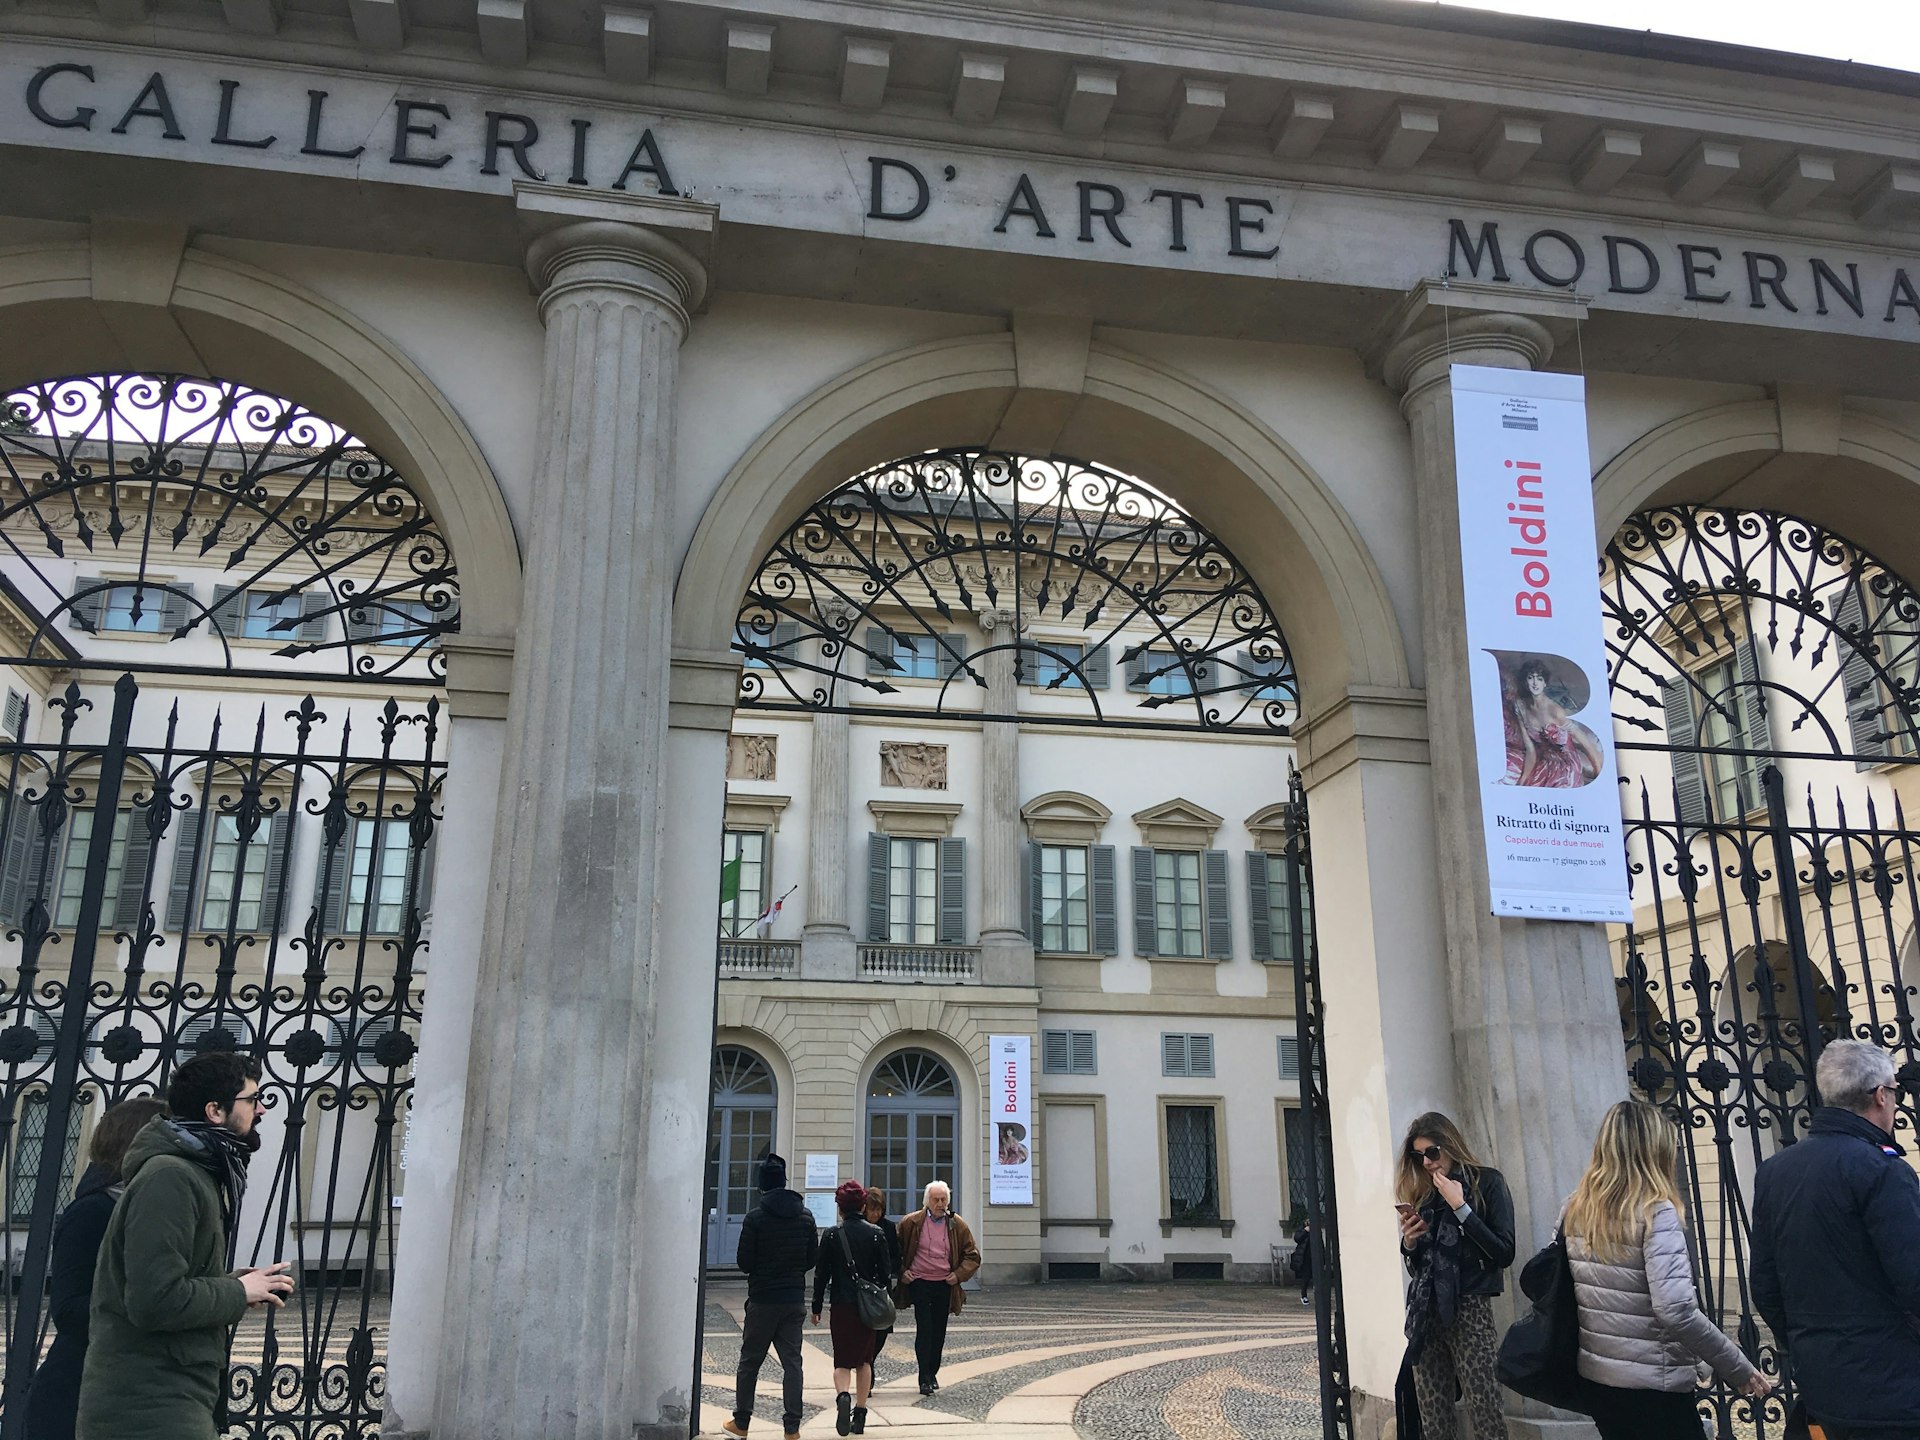 The front entrance of the Galleria d’Arte Moderna in Italy